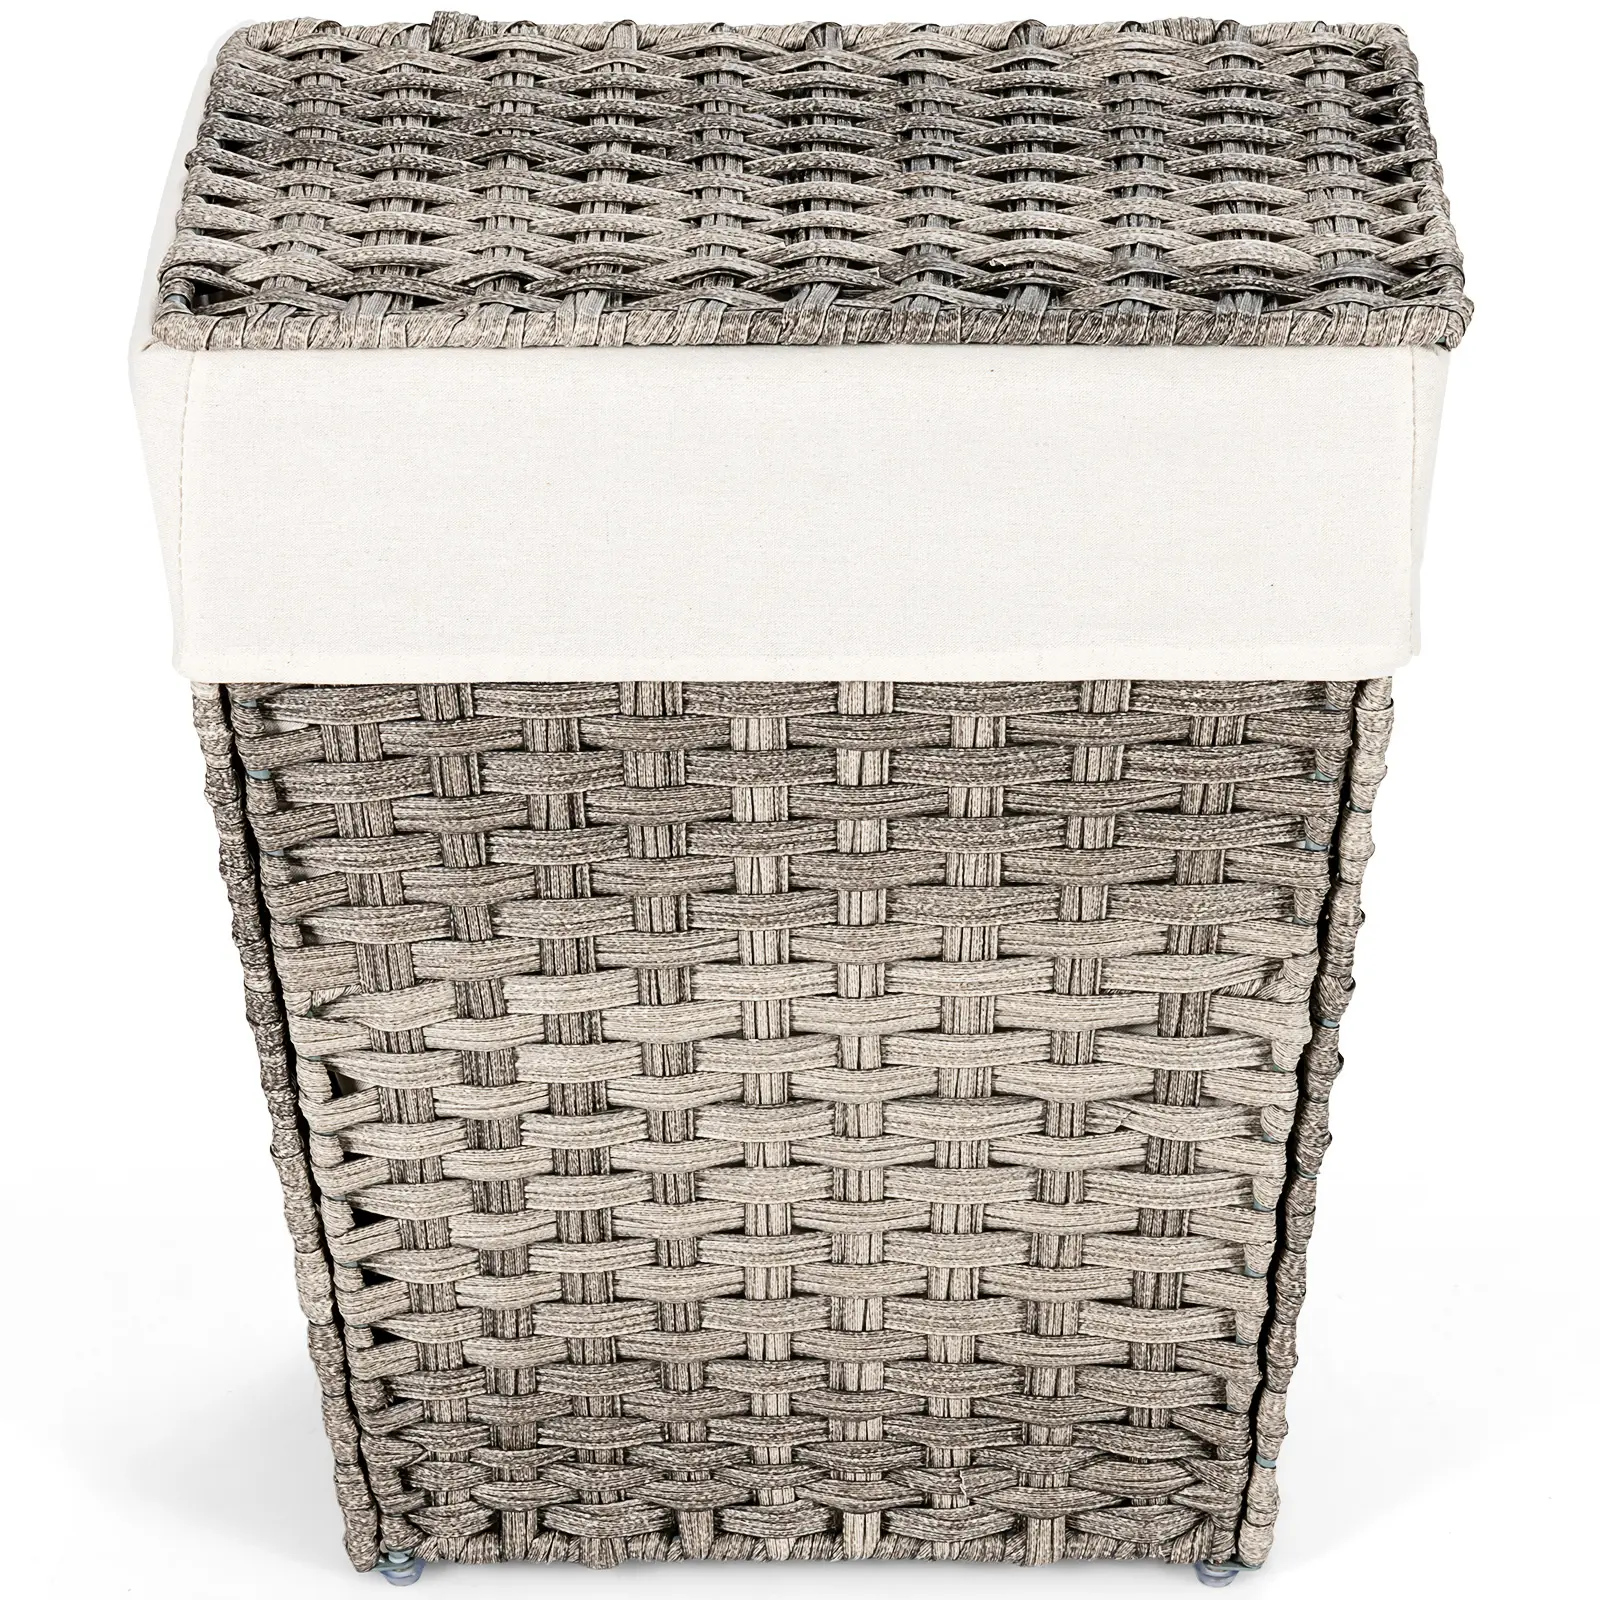 JY Large Laundry Hampers Removable Laundry Basket Foldable Fabric Laundry Basket with Drawstring Waterproof Cotton Linen